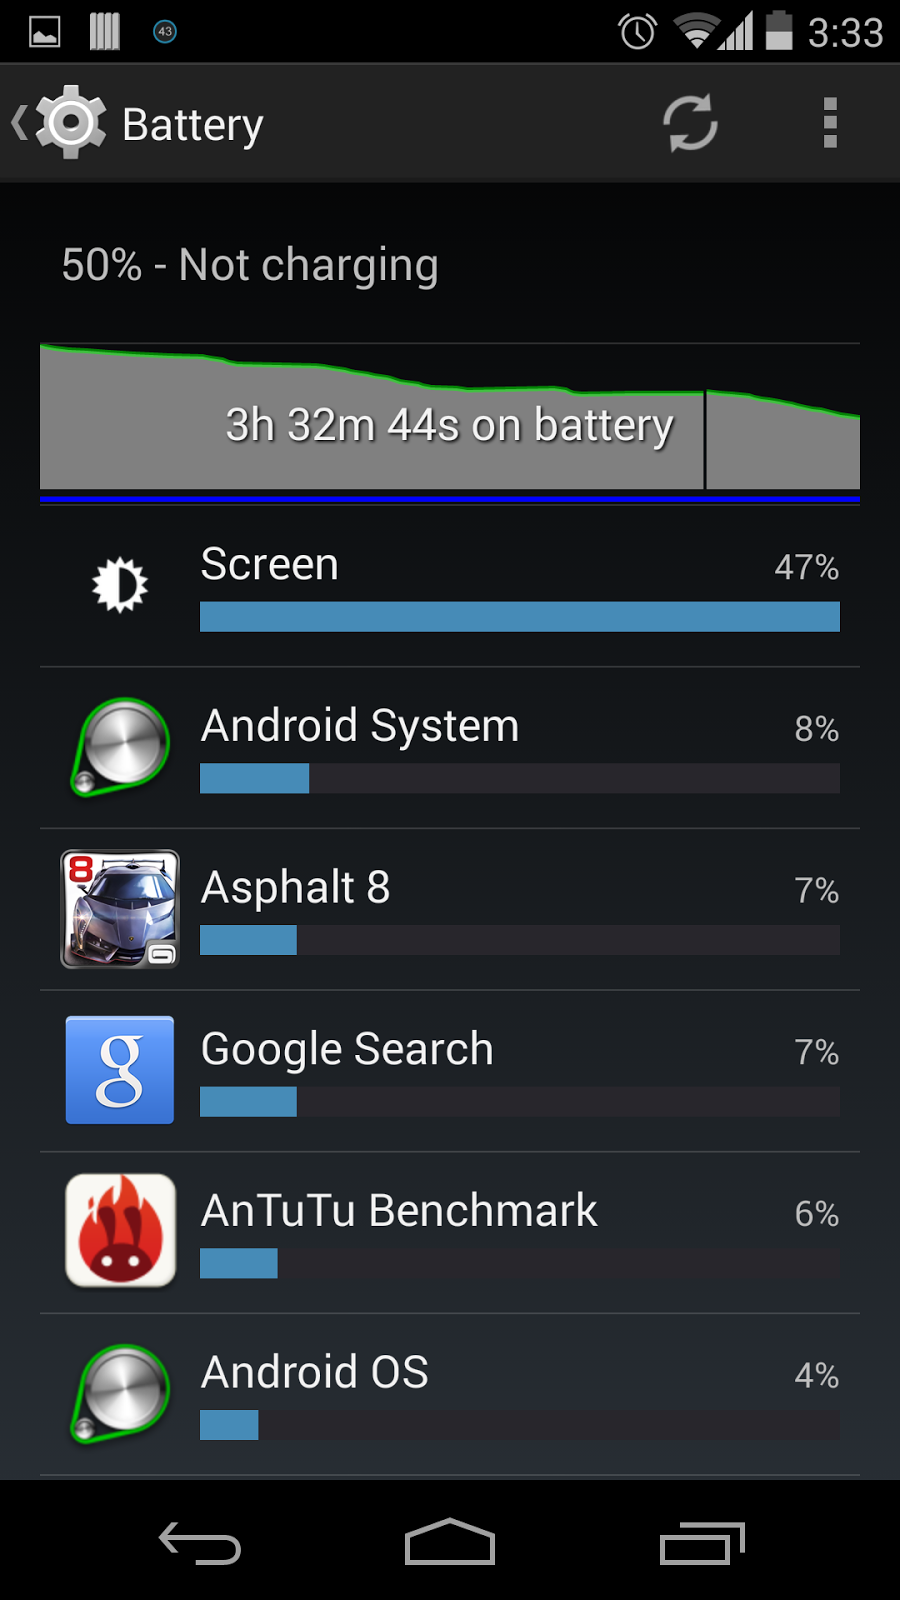 Google+LG+Nexus+5+Android+KitKat+Review+Handson+Detailed+Benchmark++%252825%2529.png